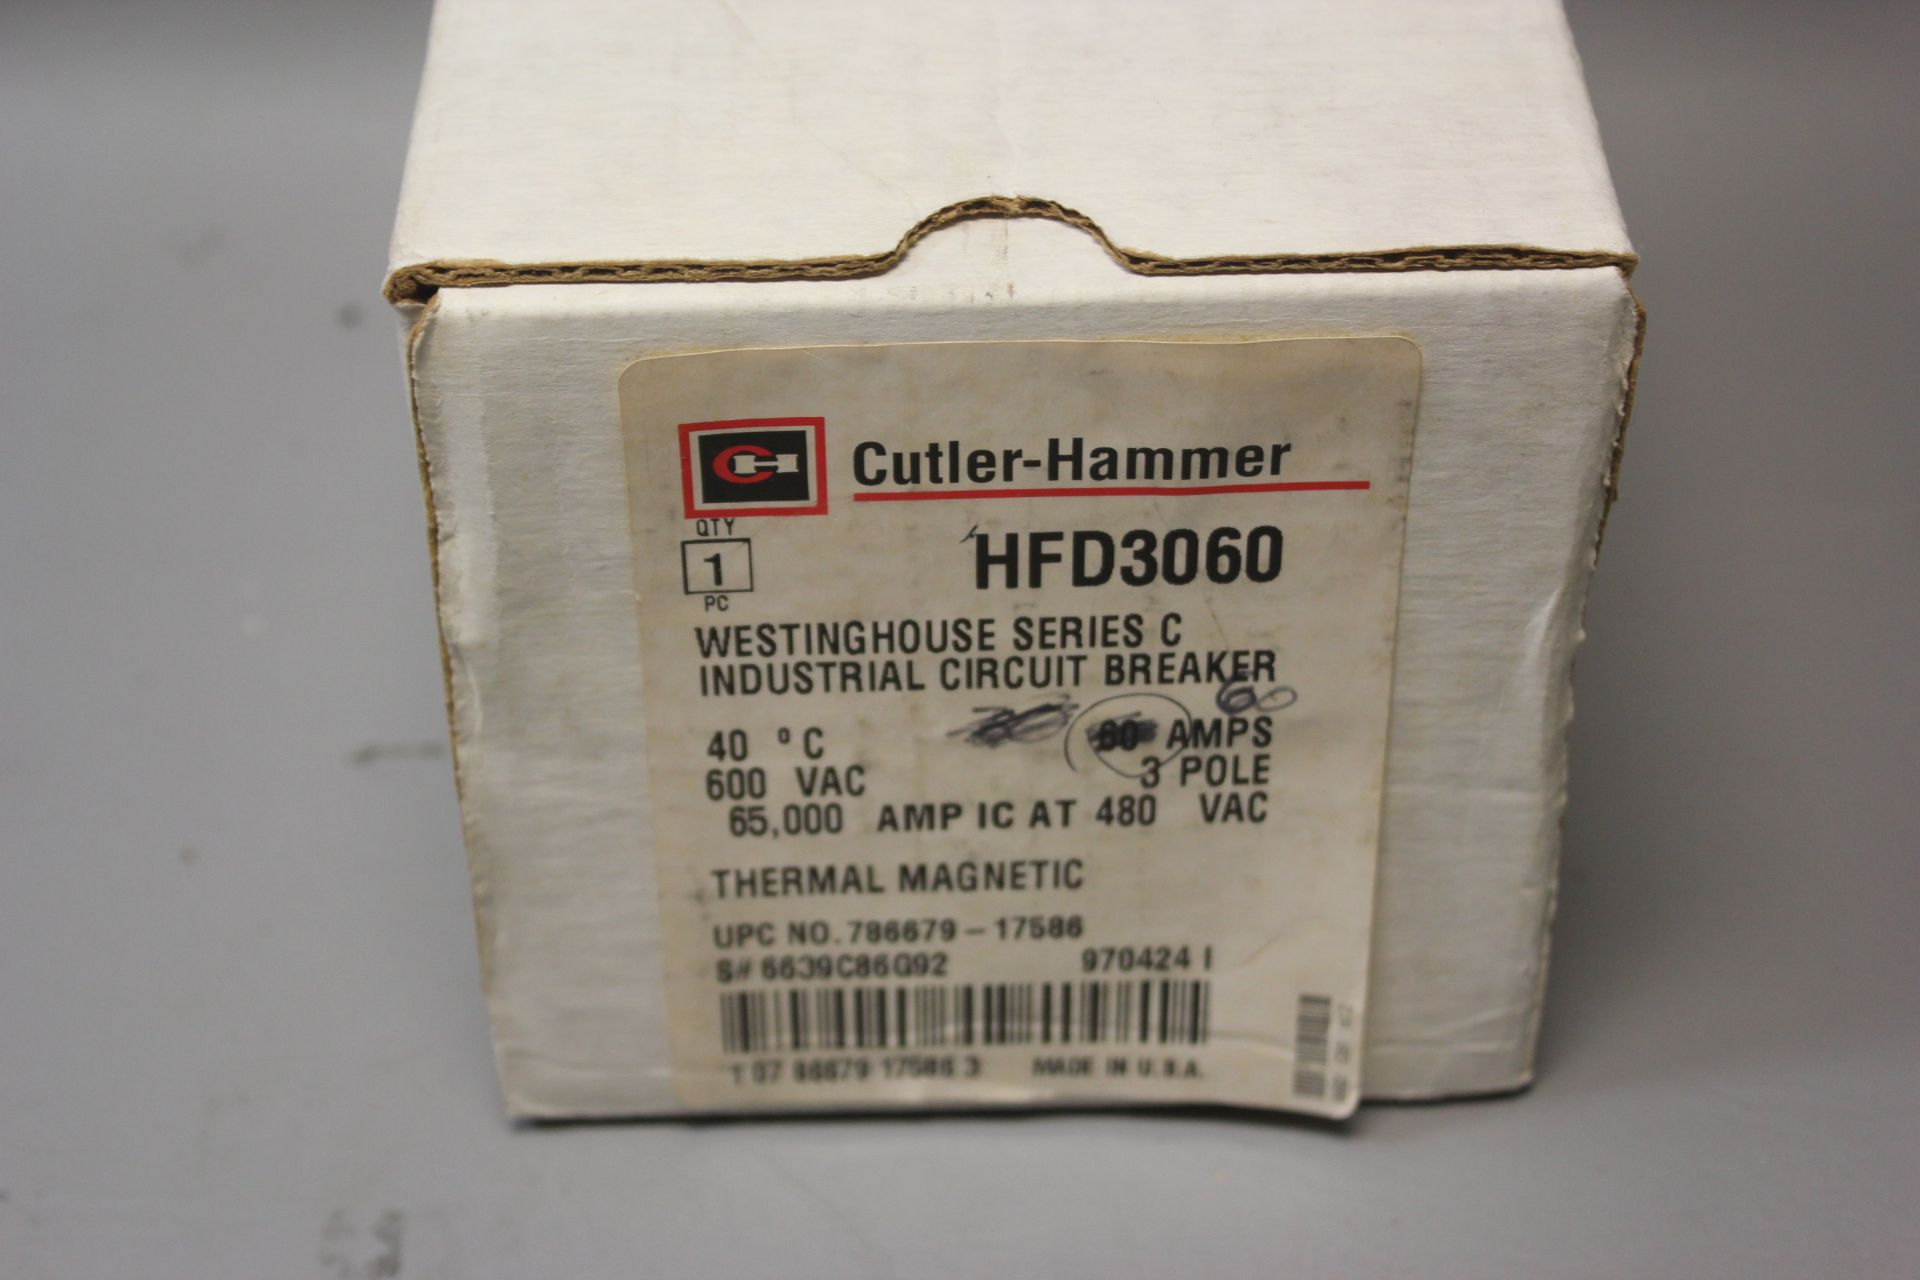 NEW CUTLER HAMMER 60A INDUSTRIAL CIRCUIT BREAKER - Image 2 of 4